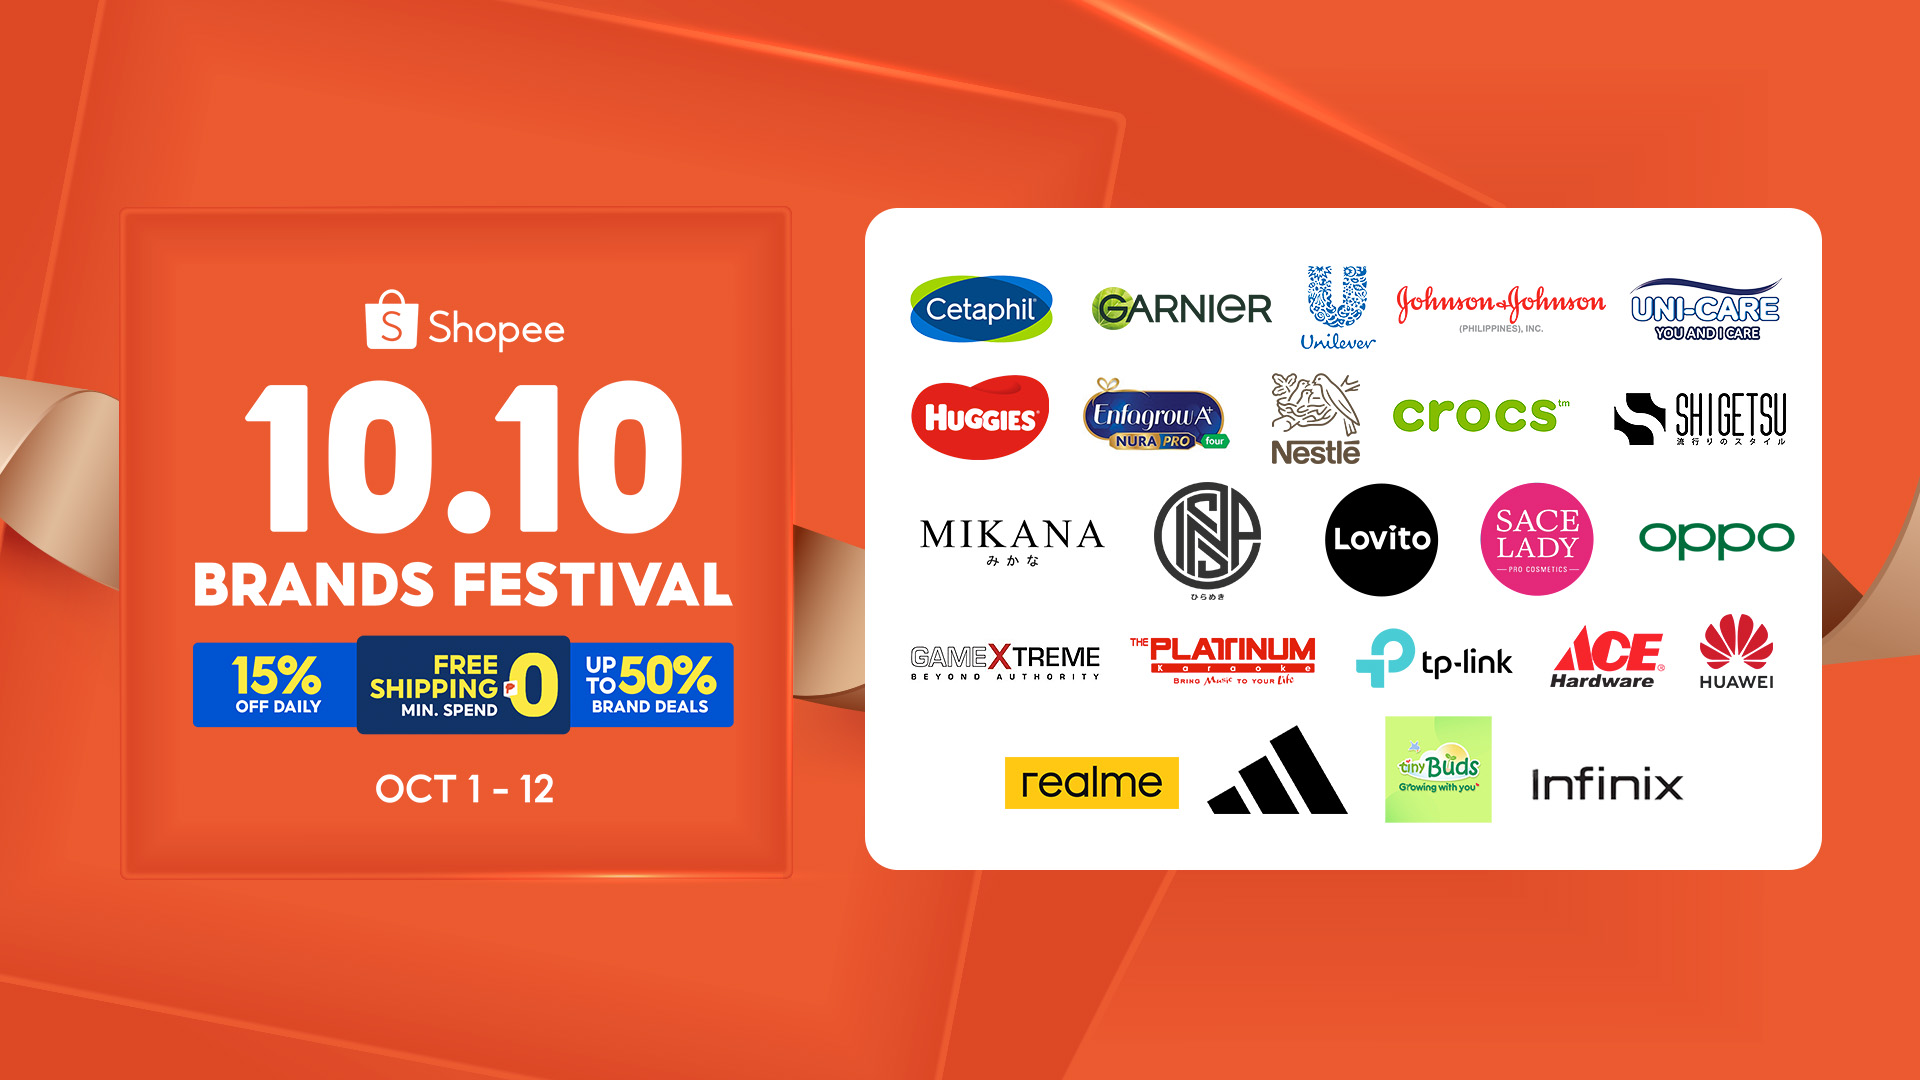 Look forward to mas mura brand deals up to 50% off, back-to-back Super Brand Days, and new brand ambassador at the 10.10 Brands Festival from October 1 to 12